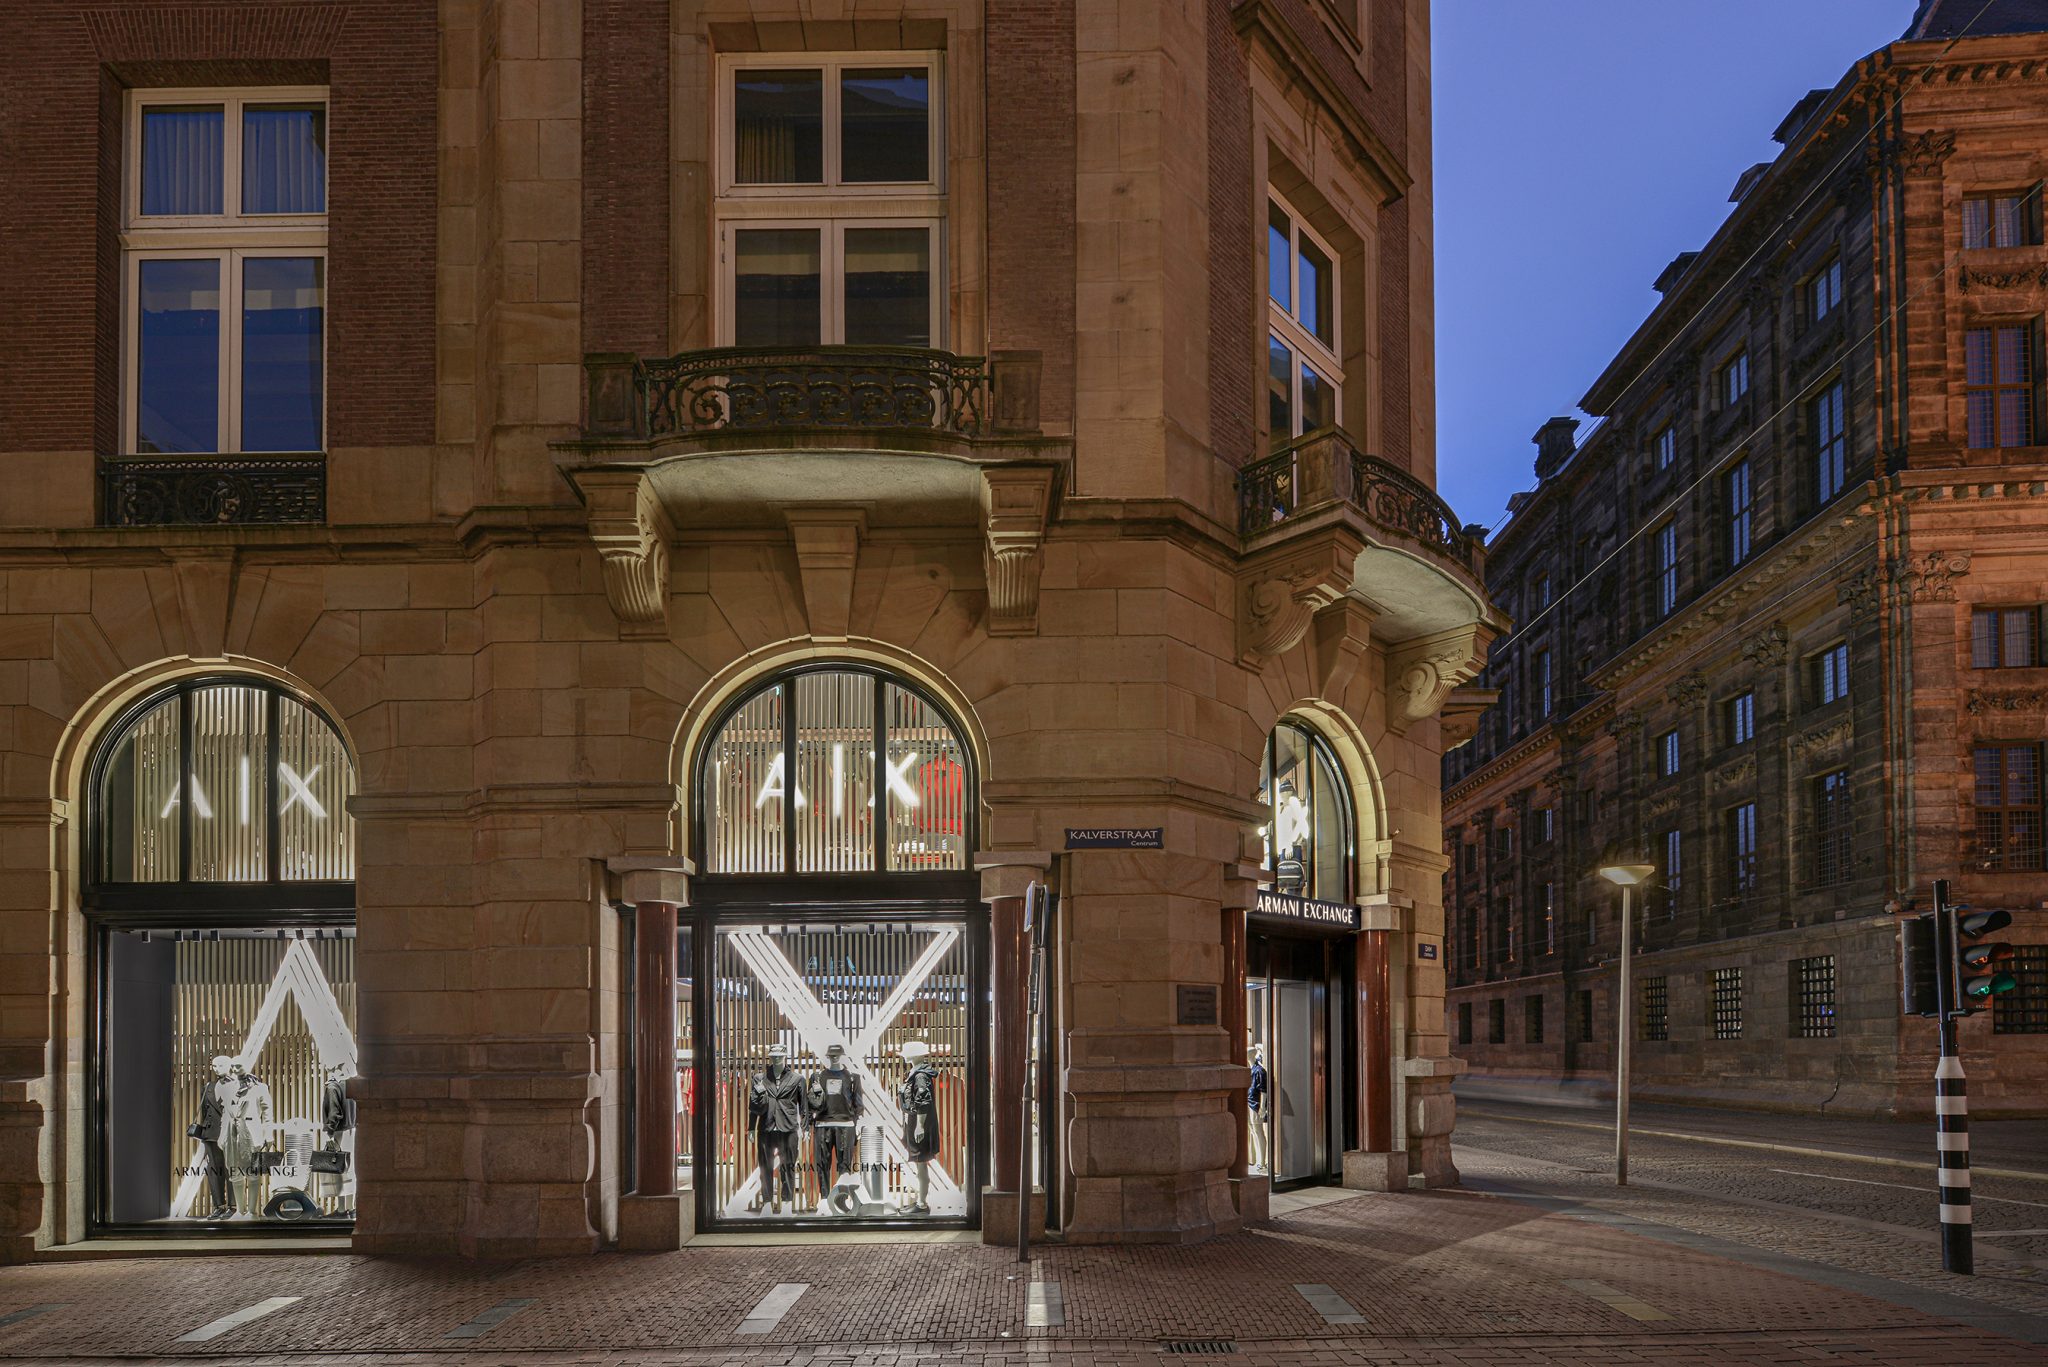 THE ARMANI GROUP OPENS THE FIRST A|X ARMANI EXCHANGE STORE IN AMSTERDAM -  Numéro Netherlands